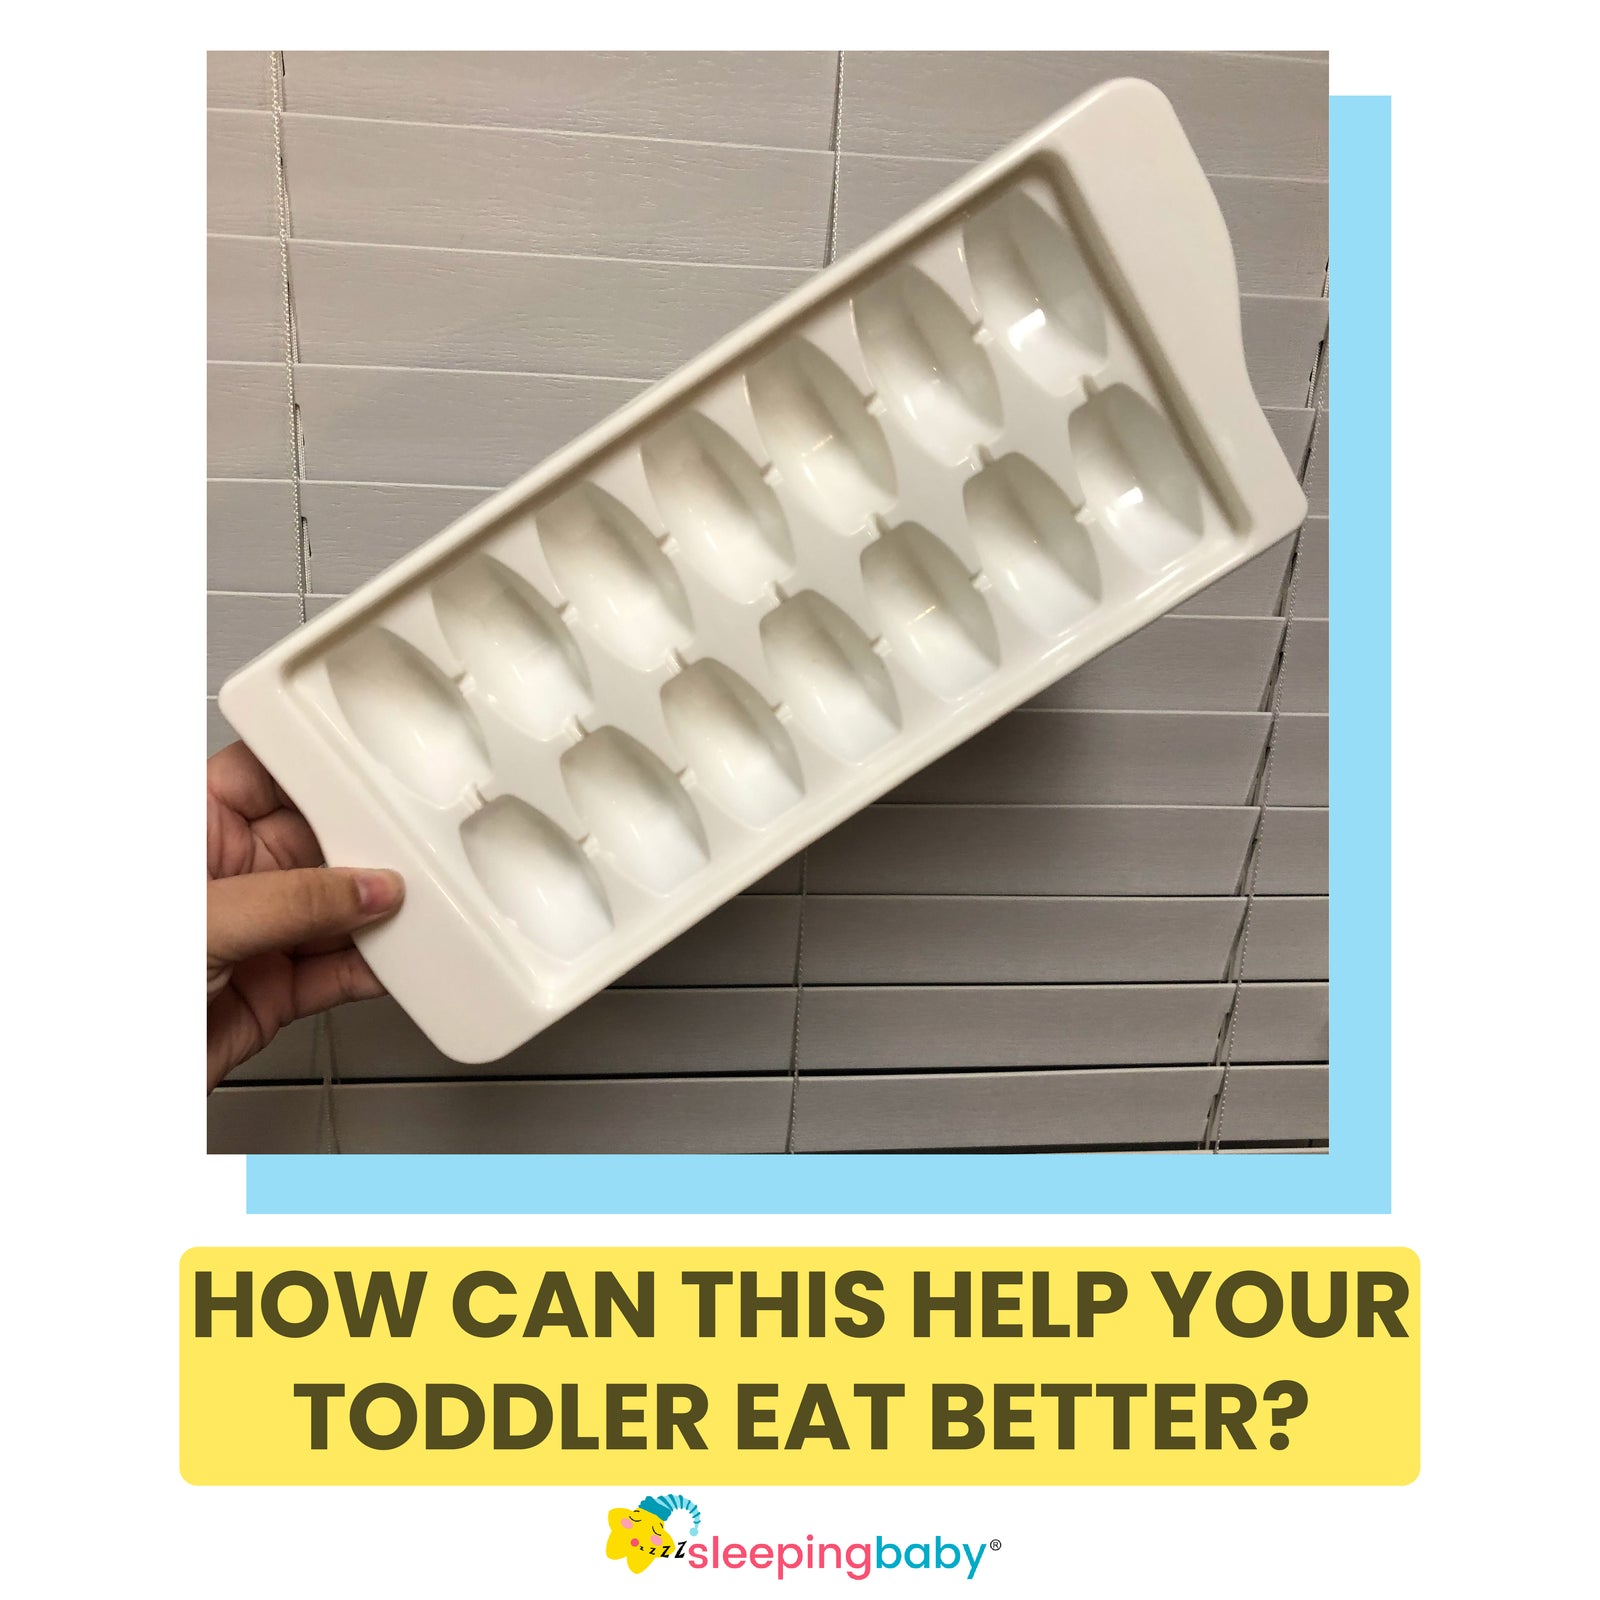 5 Tips That Actually Work for Healthy Eating With Toddlers